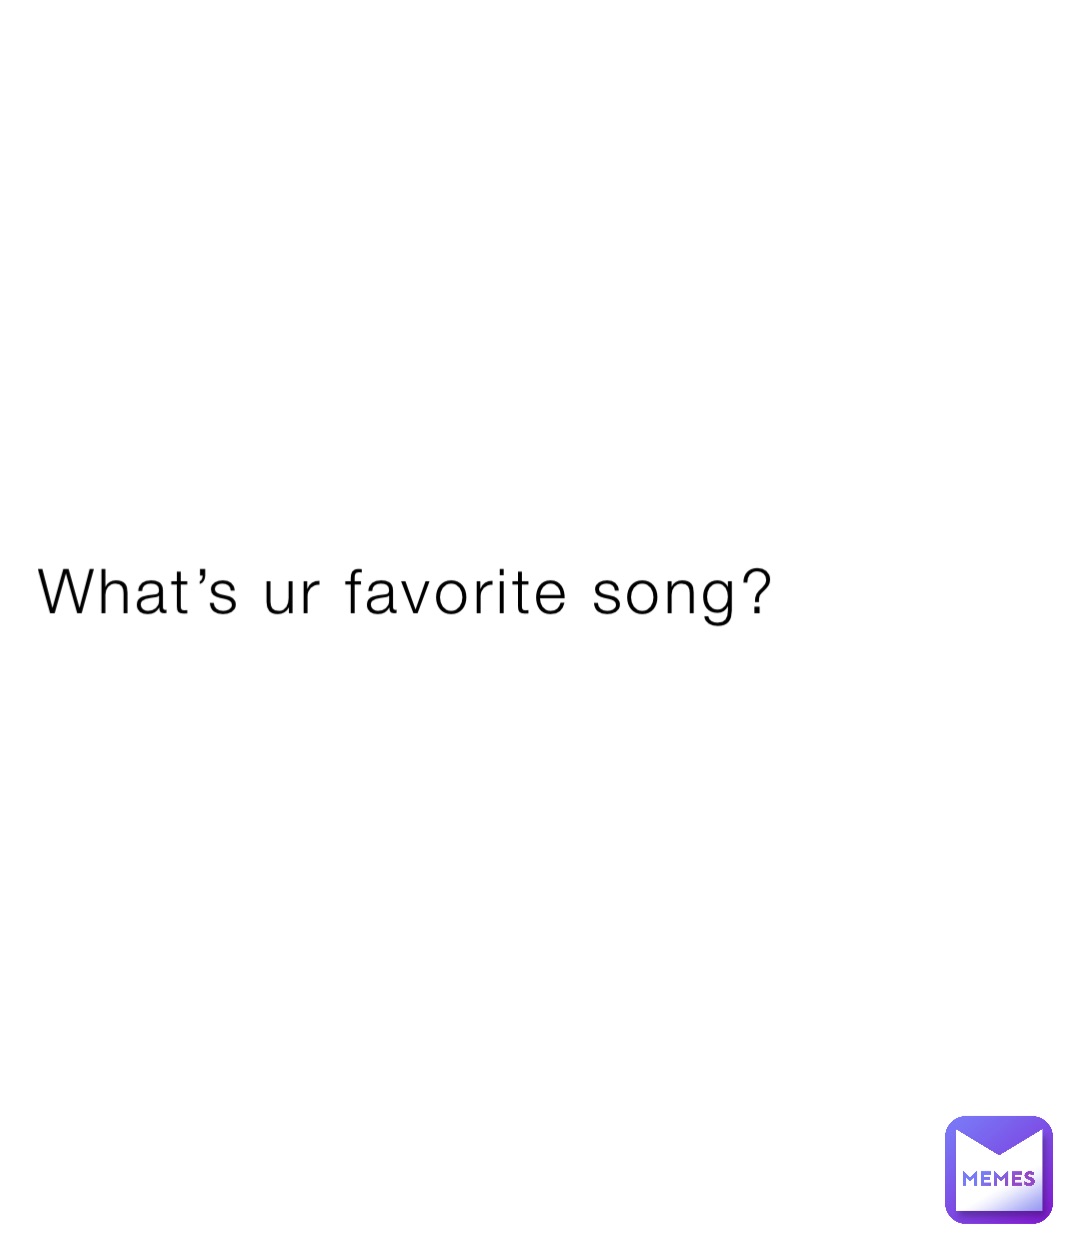 What’s ur favorite song?